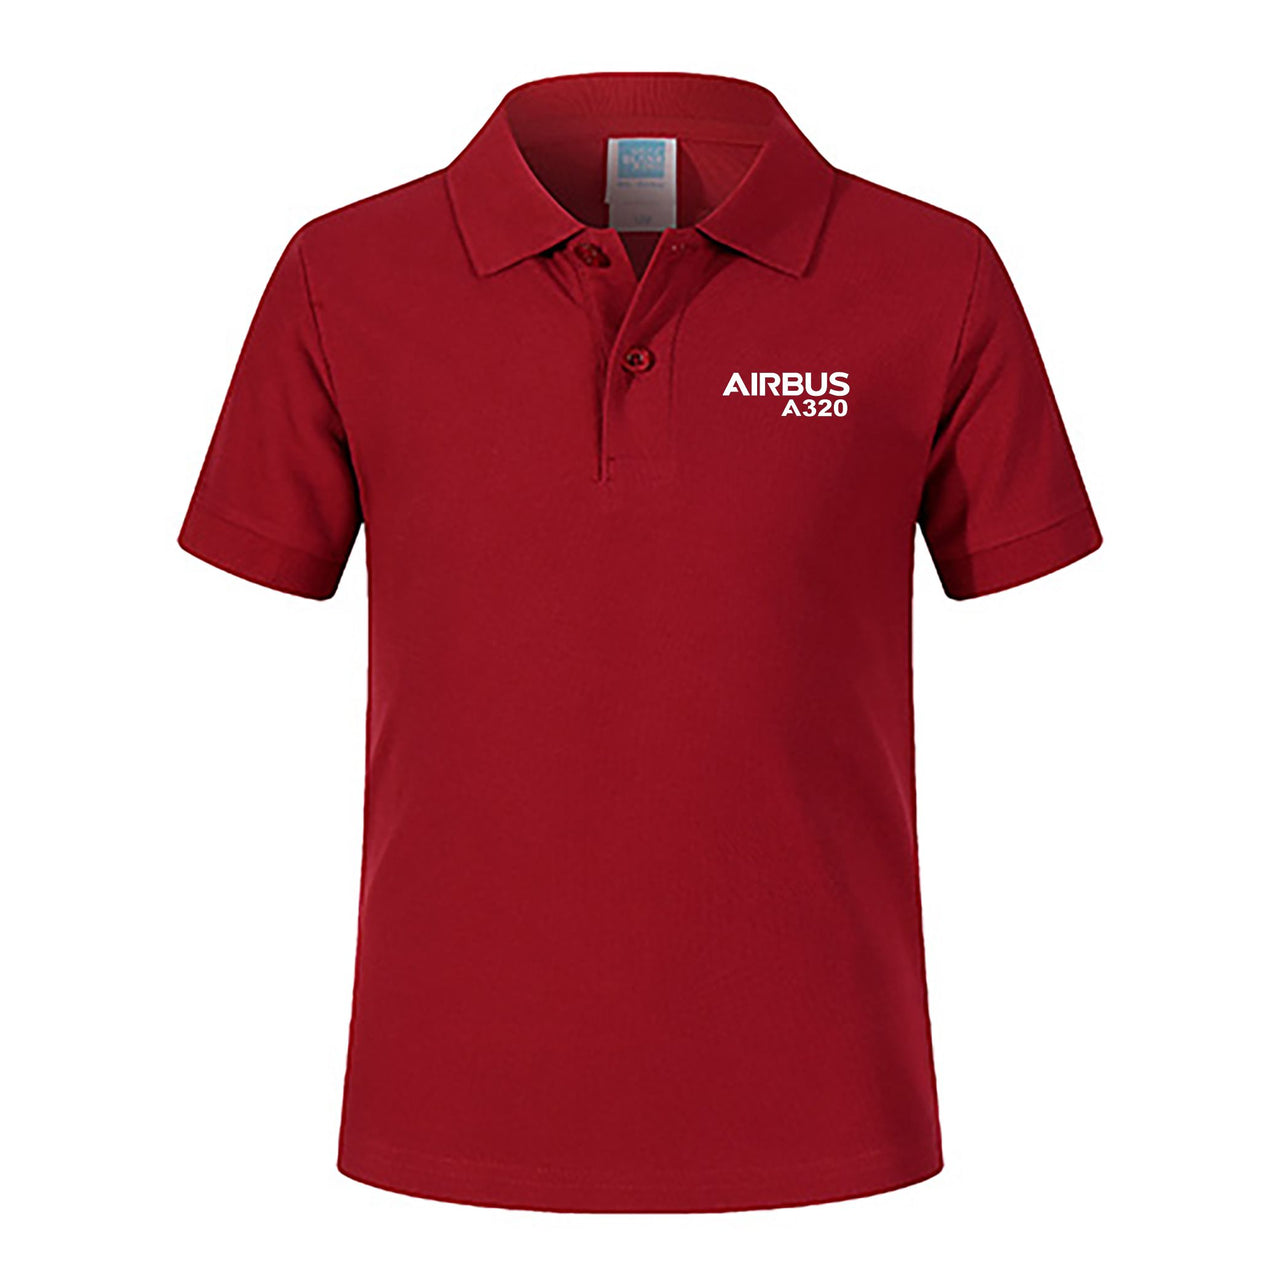 Airbus A320 & Text Designed Children Polo T-Shirts